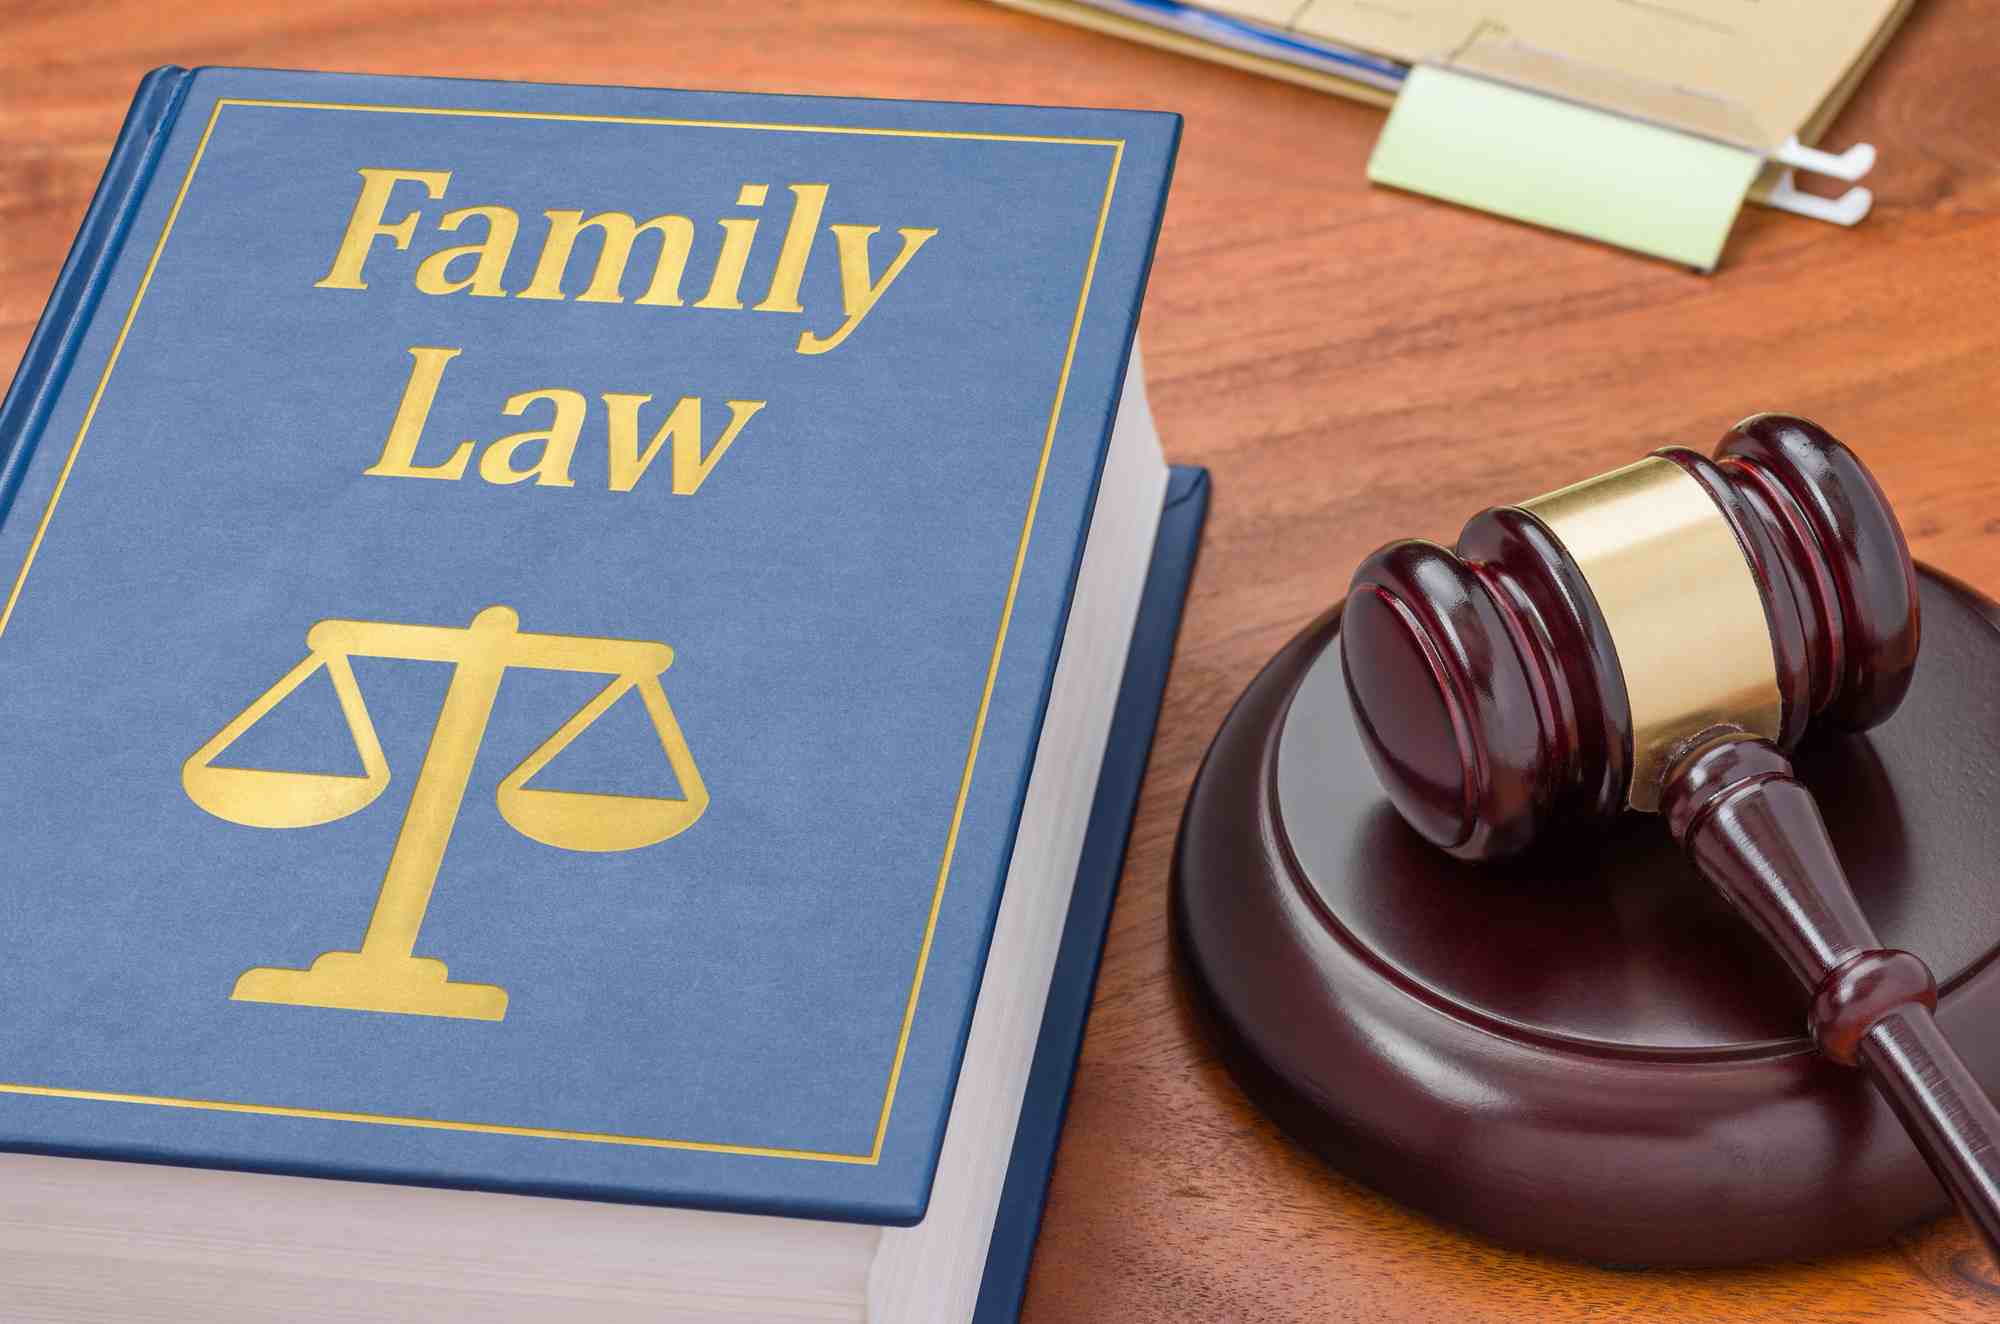 Family law book placed on the table